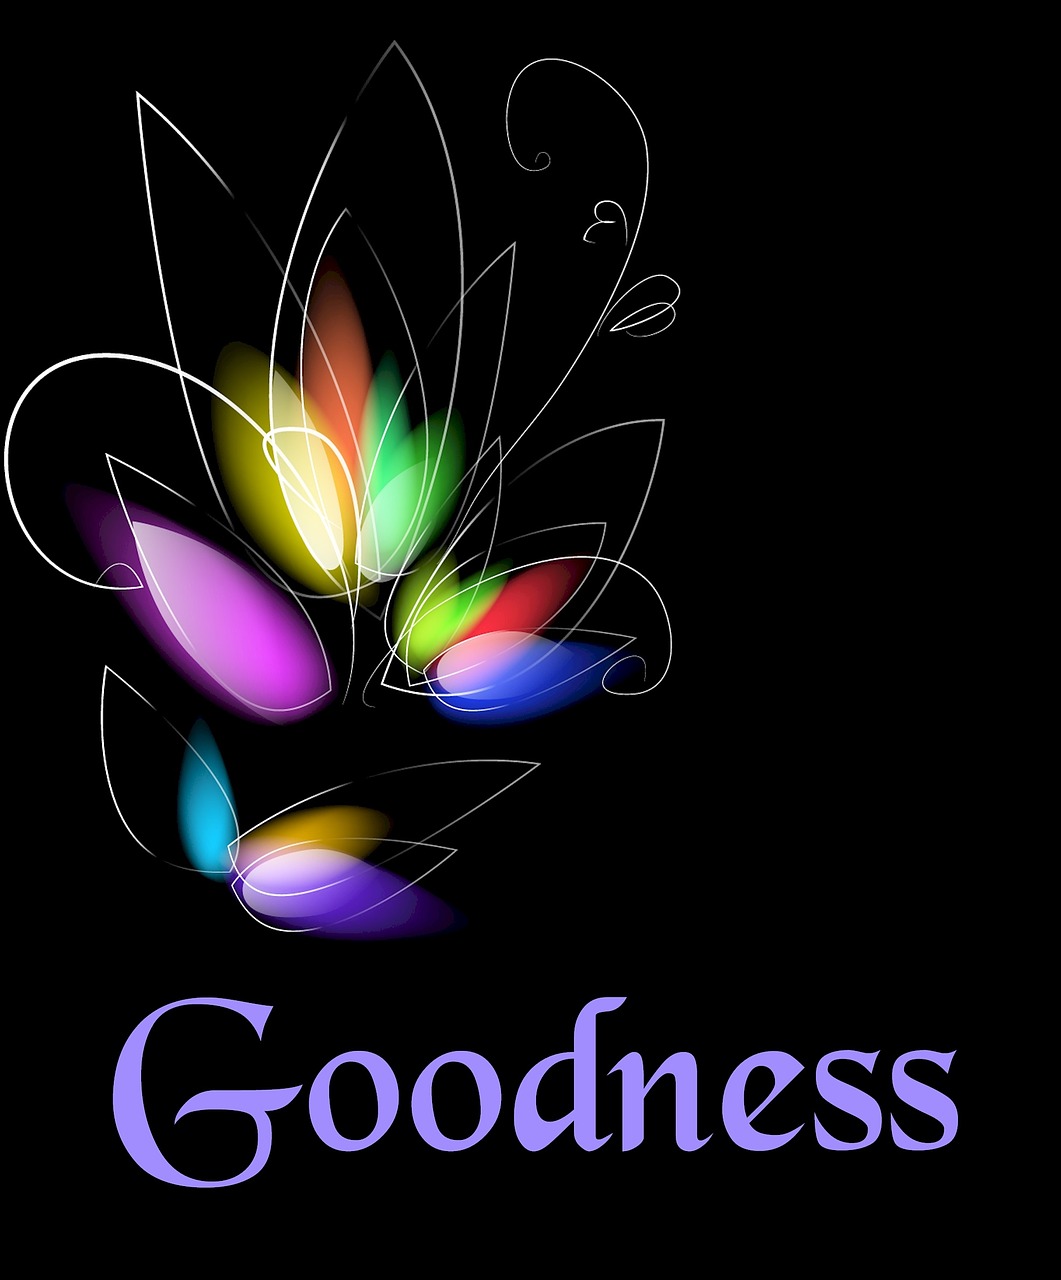 goodness character design free photo